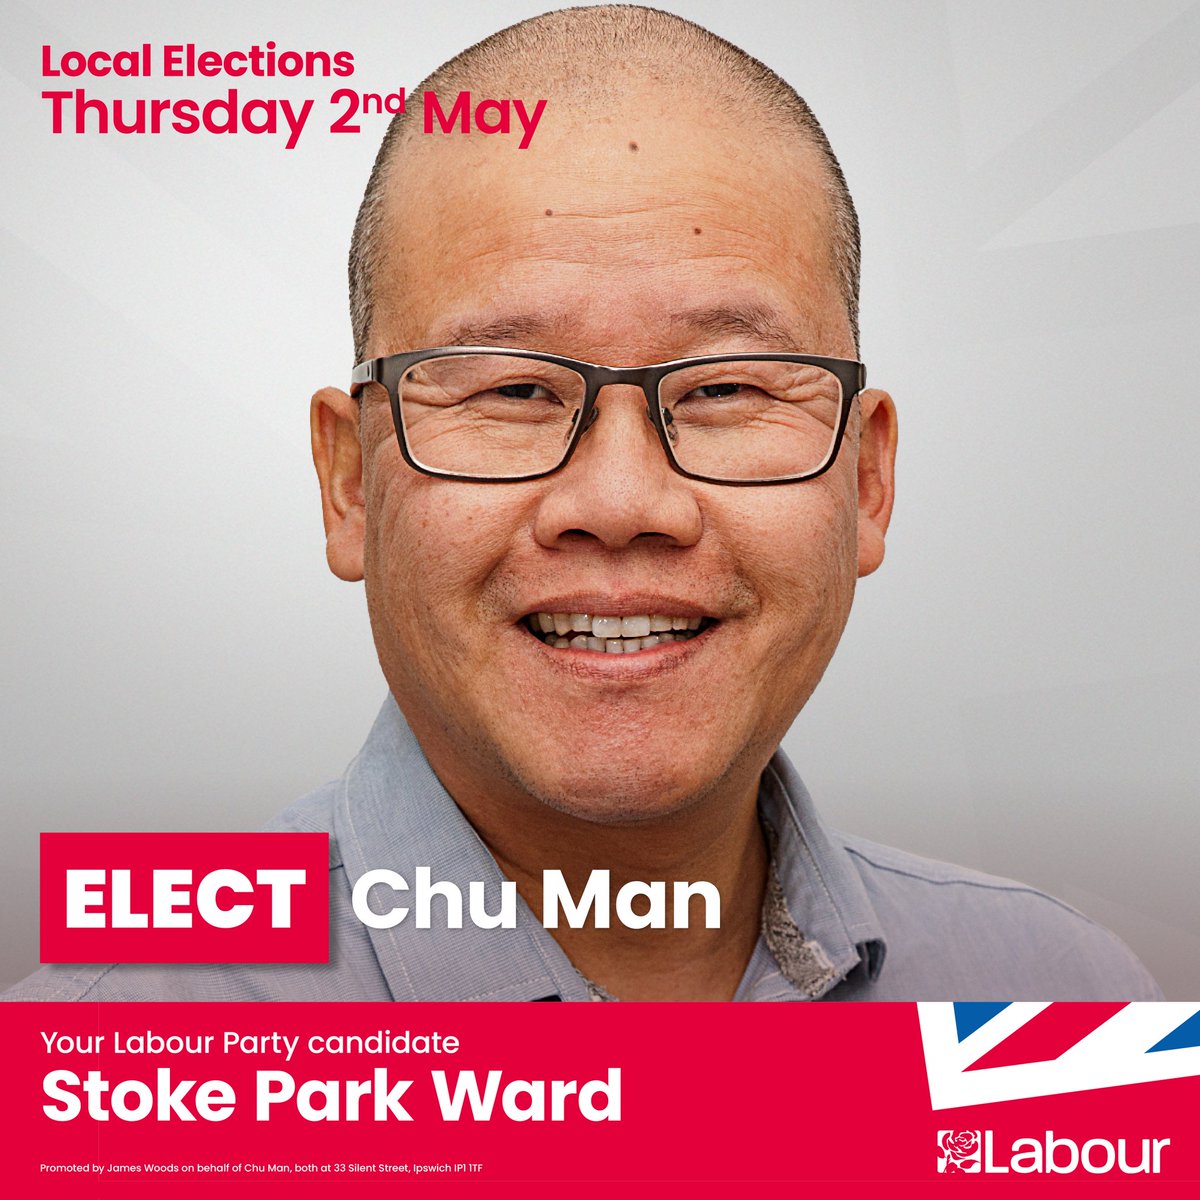 Britain has given me so much. If elected as your councillor I want to see a thriving, connected community in Stoke Park. With my neuro-diverse, creative and design background, I will bring fresh ideas and creativity for the benefit of Stoke Park. ipswich-labour.org.uk/2024-ibc-candi…